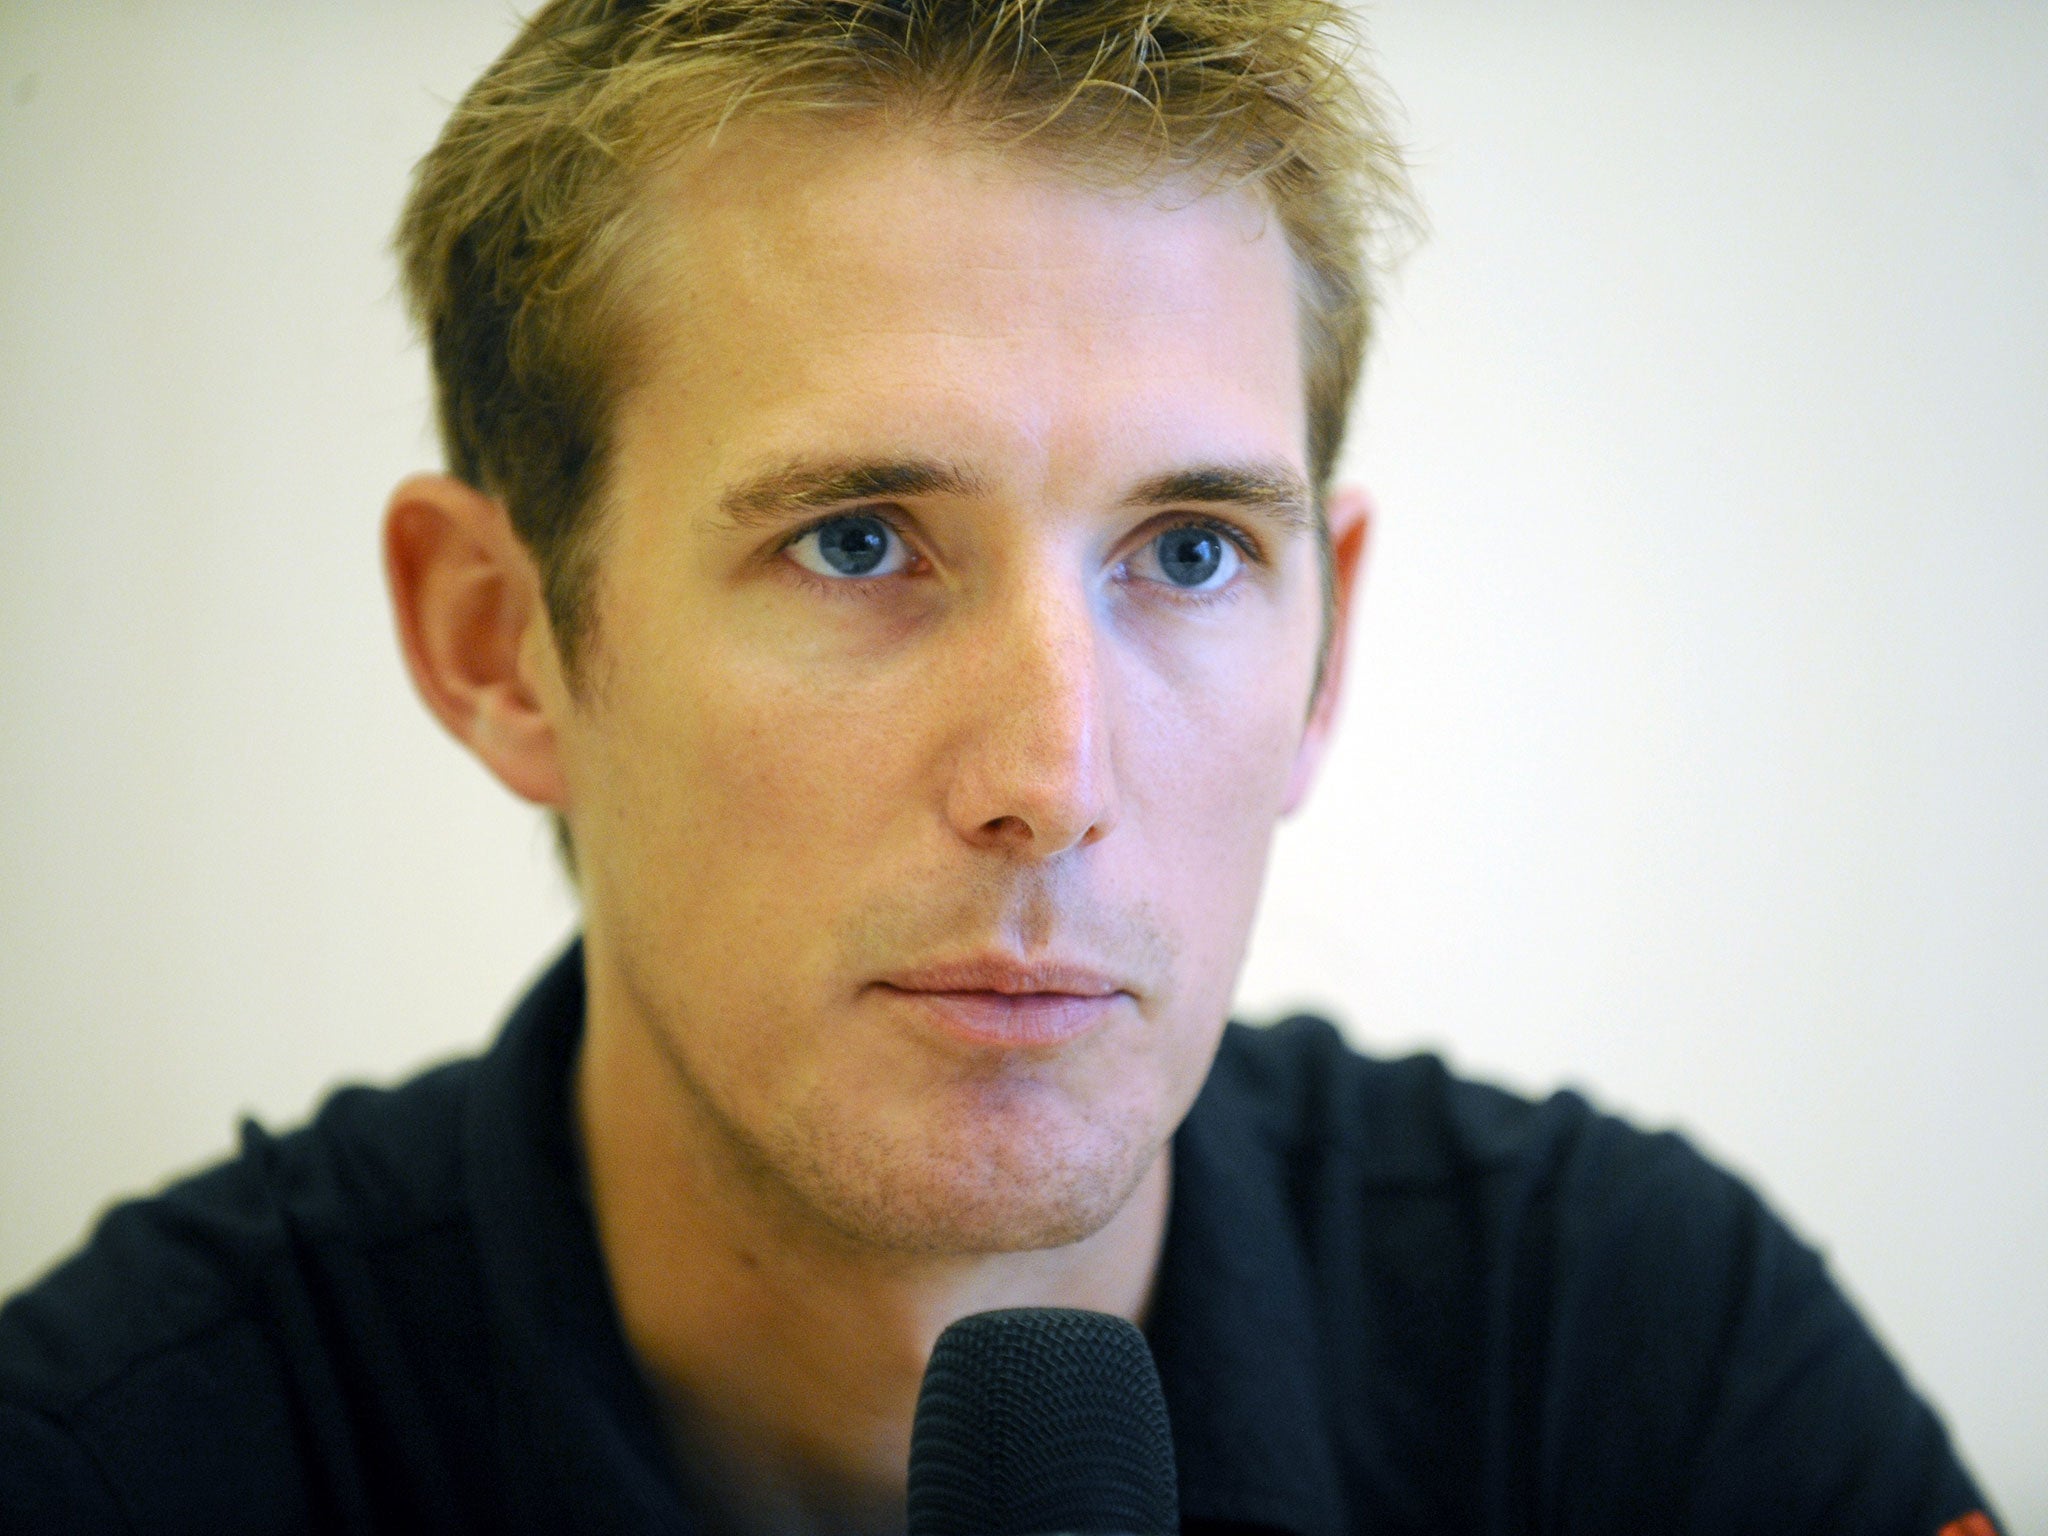 2010 Tour de France winner Andy Schleck has been forced to retire